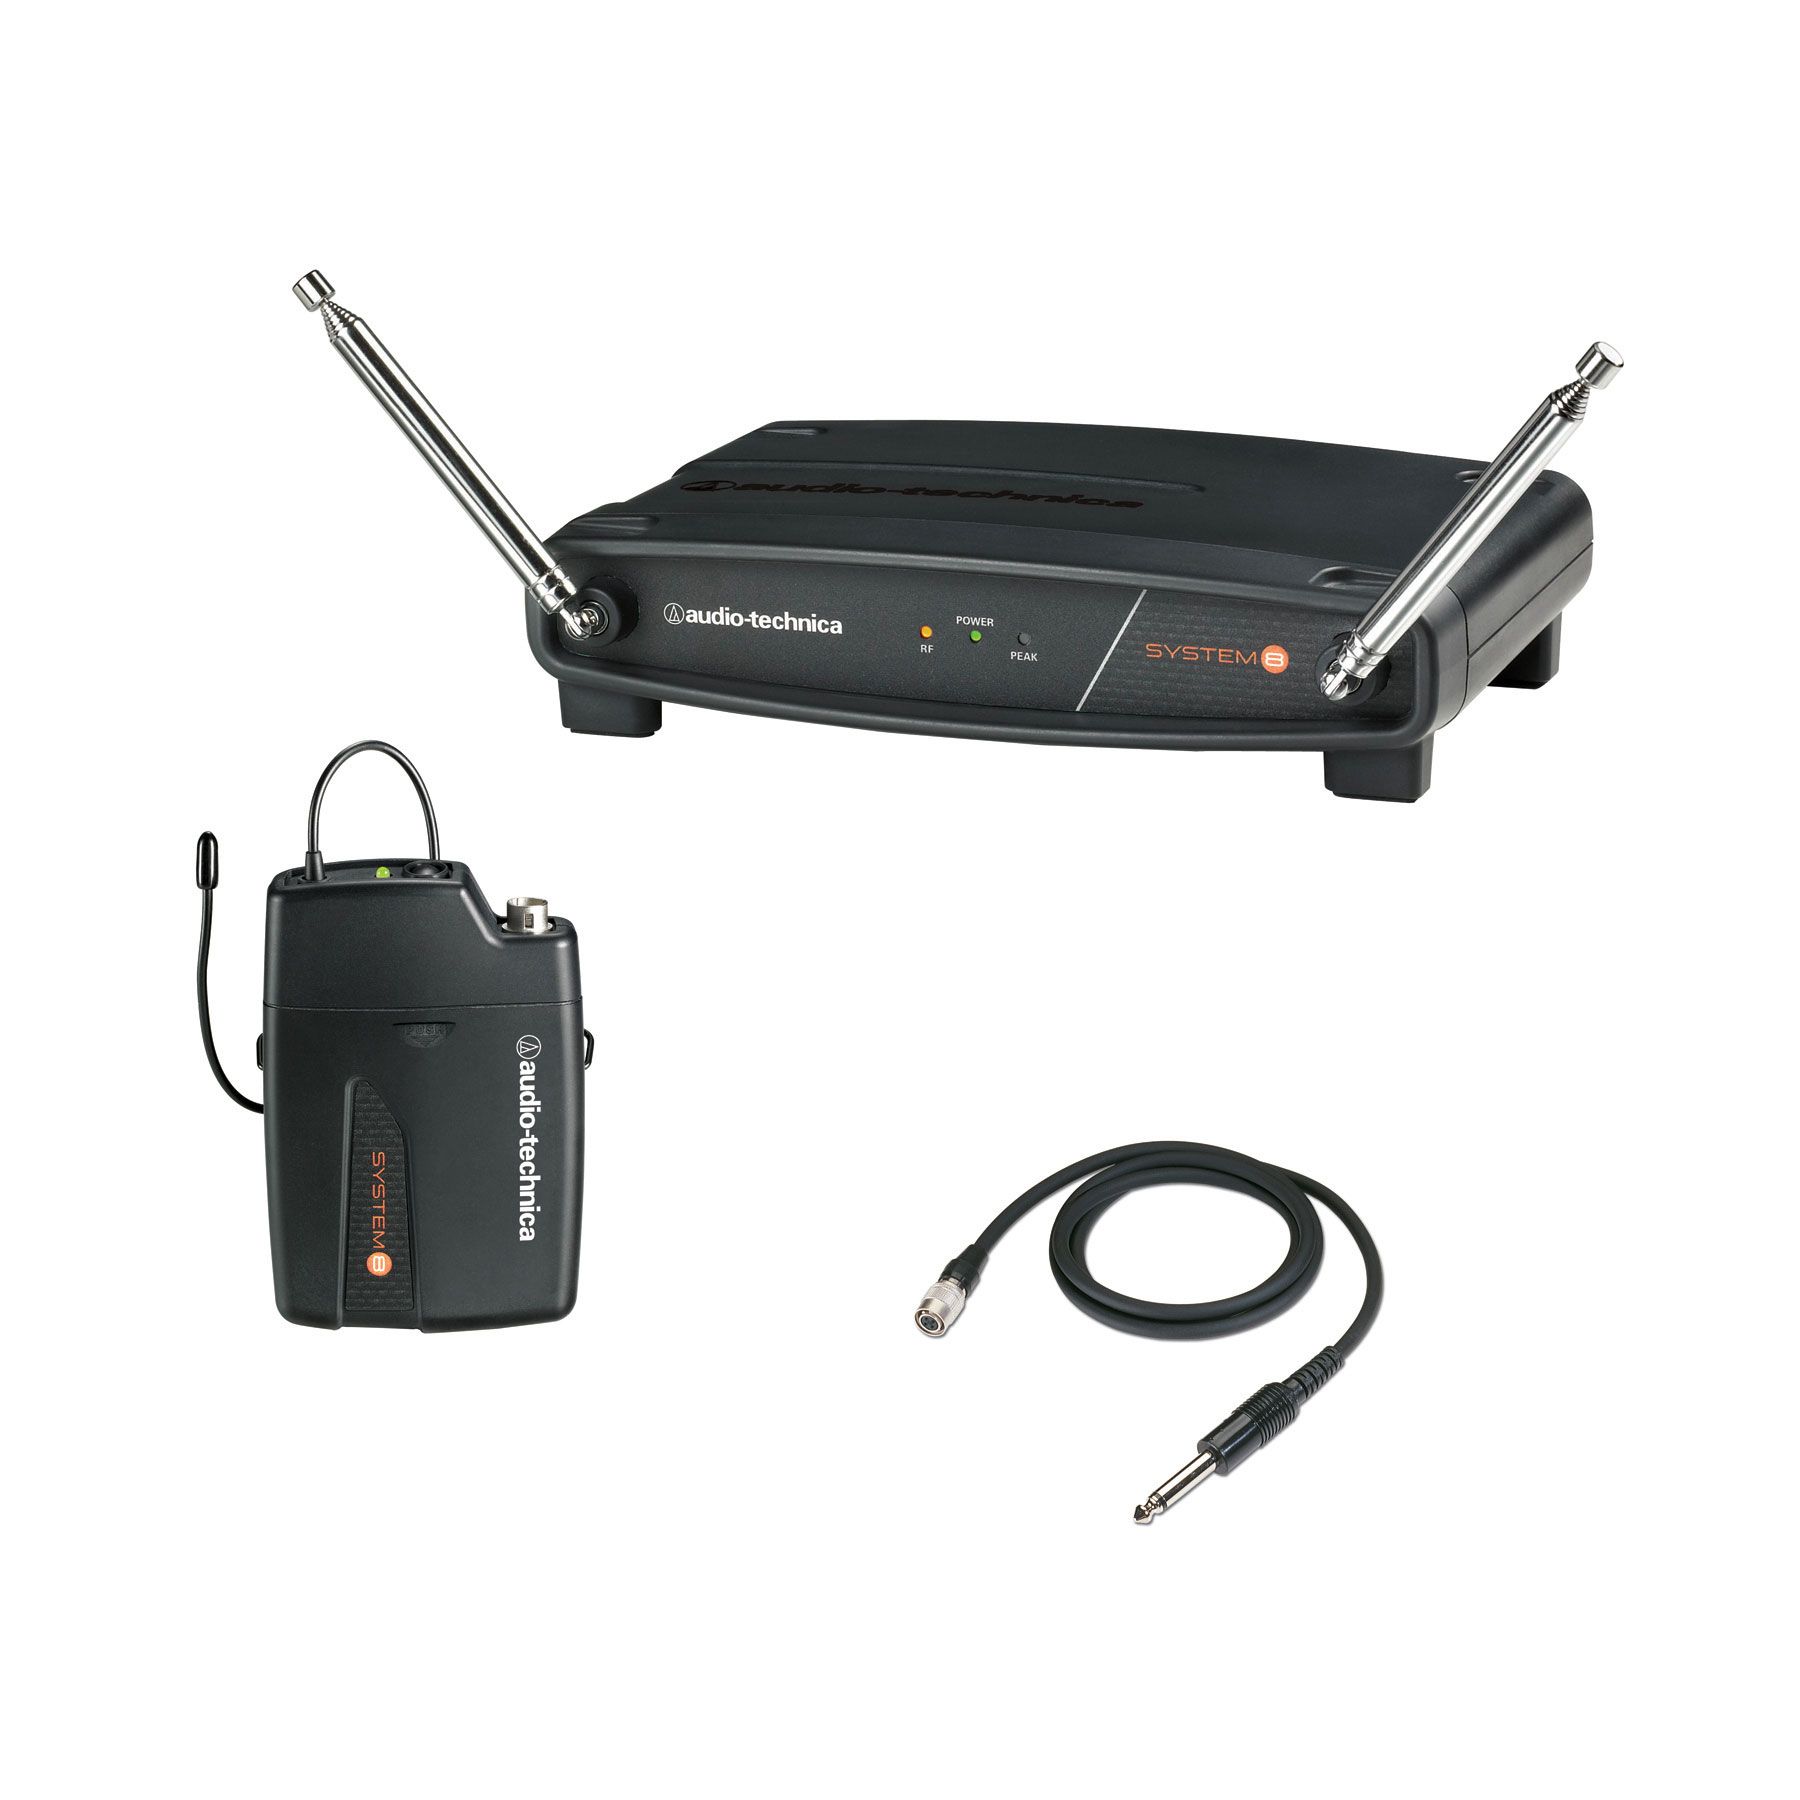   Technica ATW 801 G System 8 Guitar Wireless Microphone System